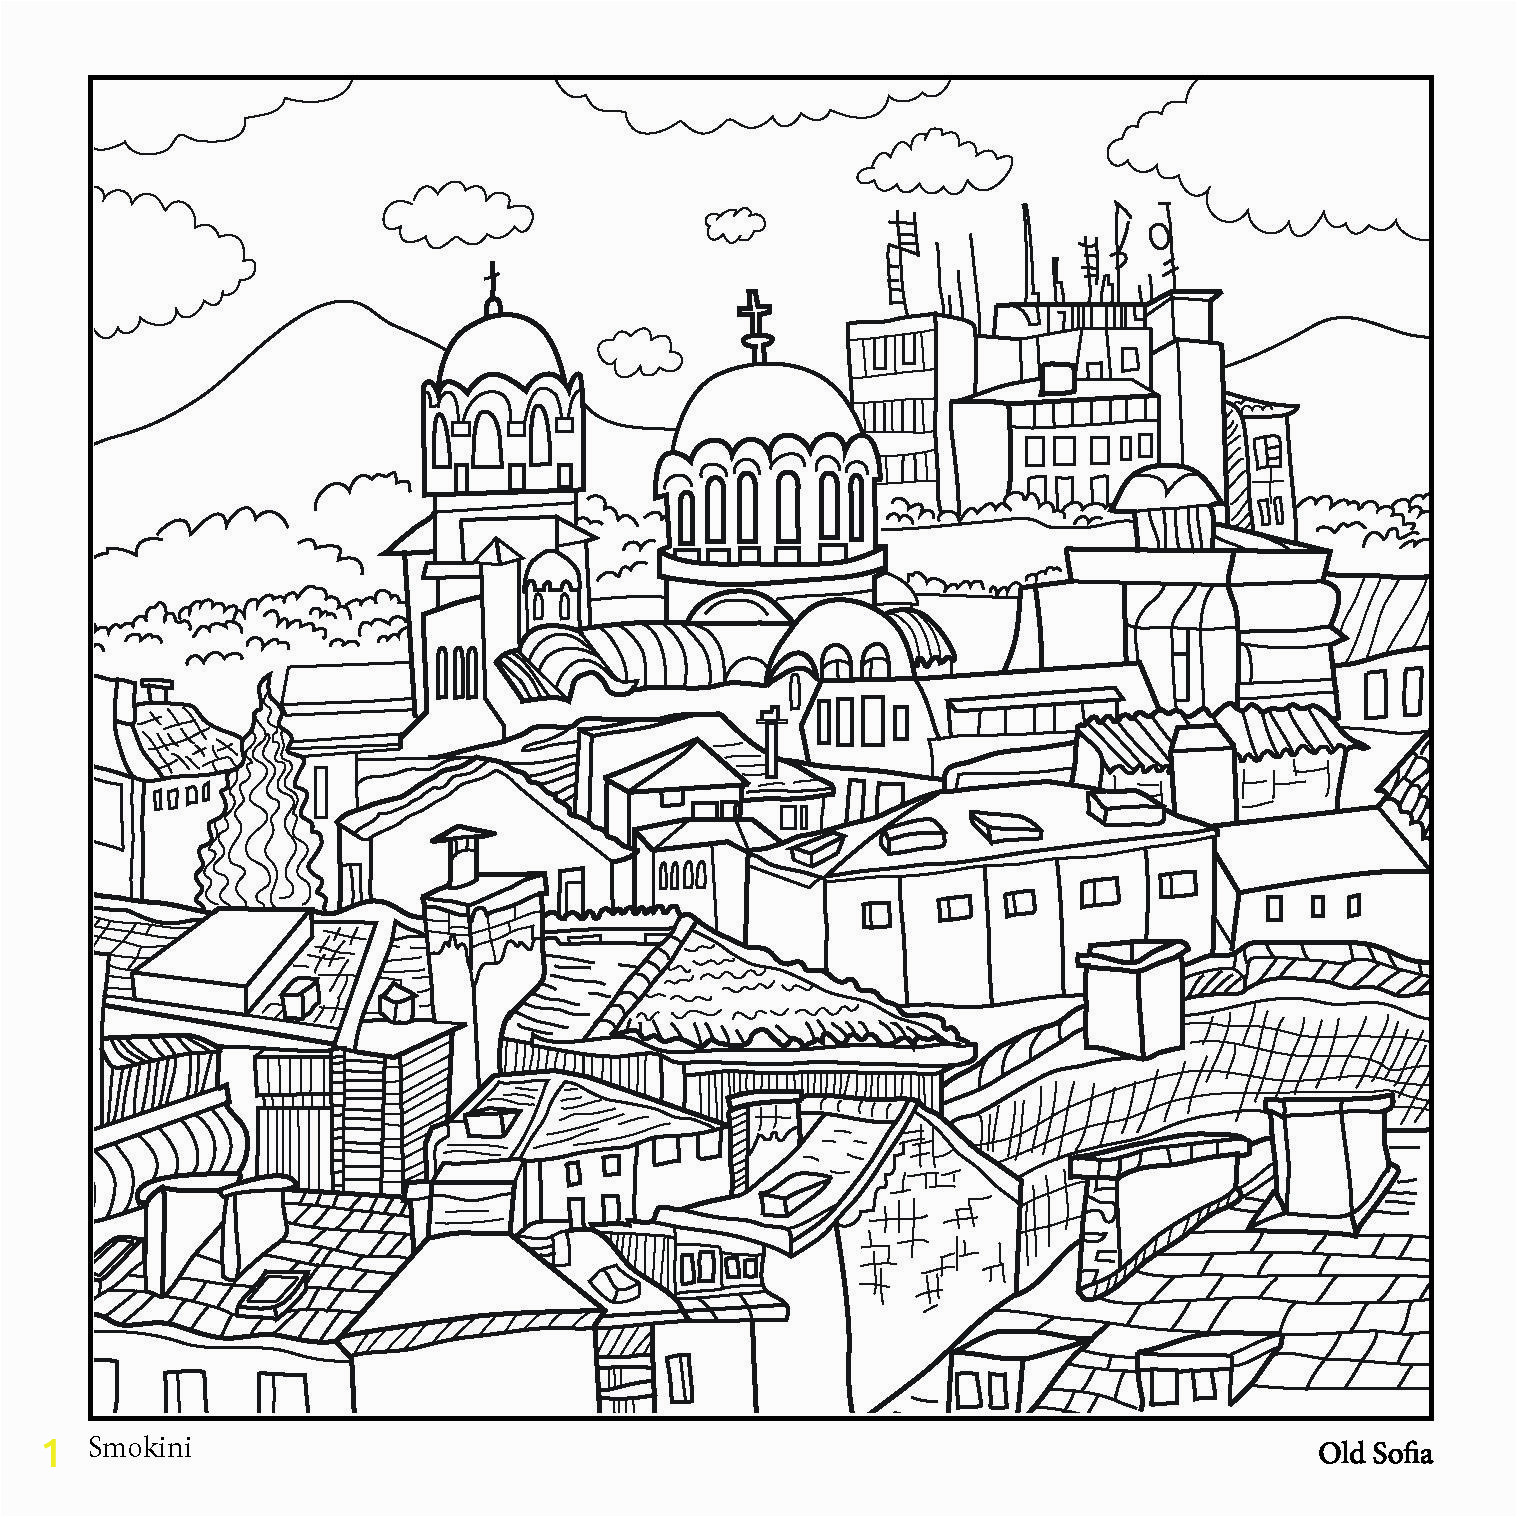 Draw It too Coloring Pages This is An Adult Coloring Page From Urban Stories Coloring